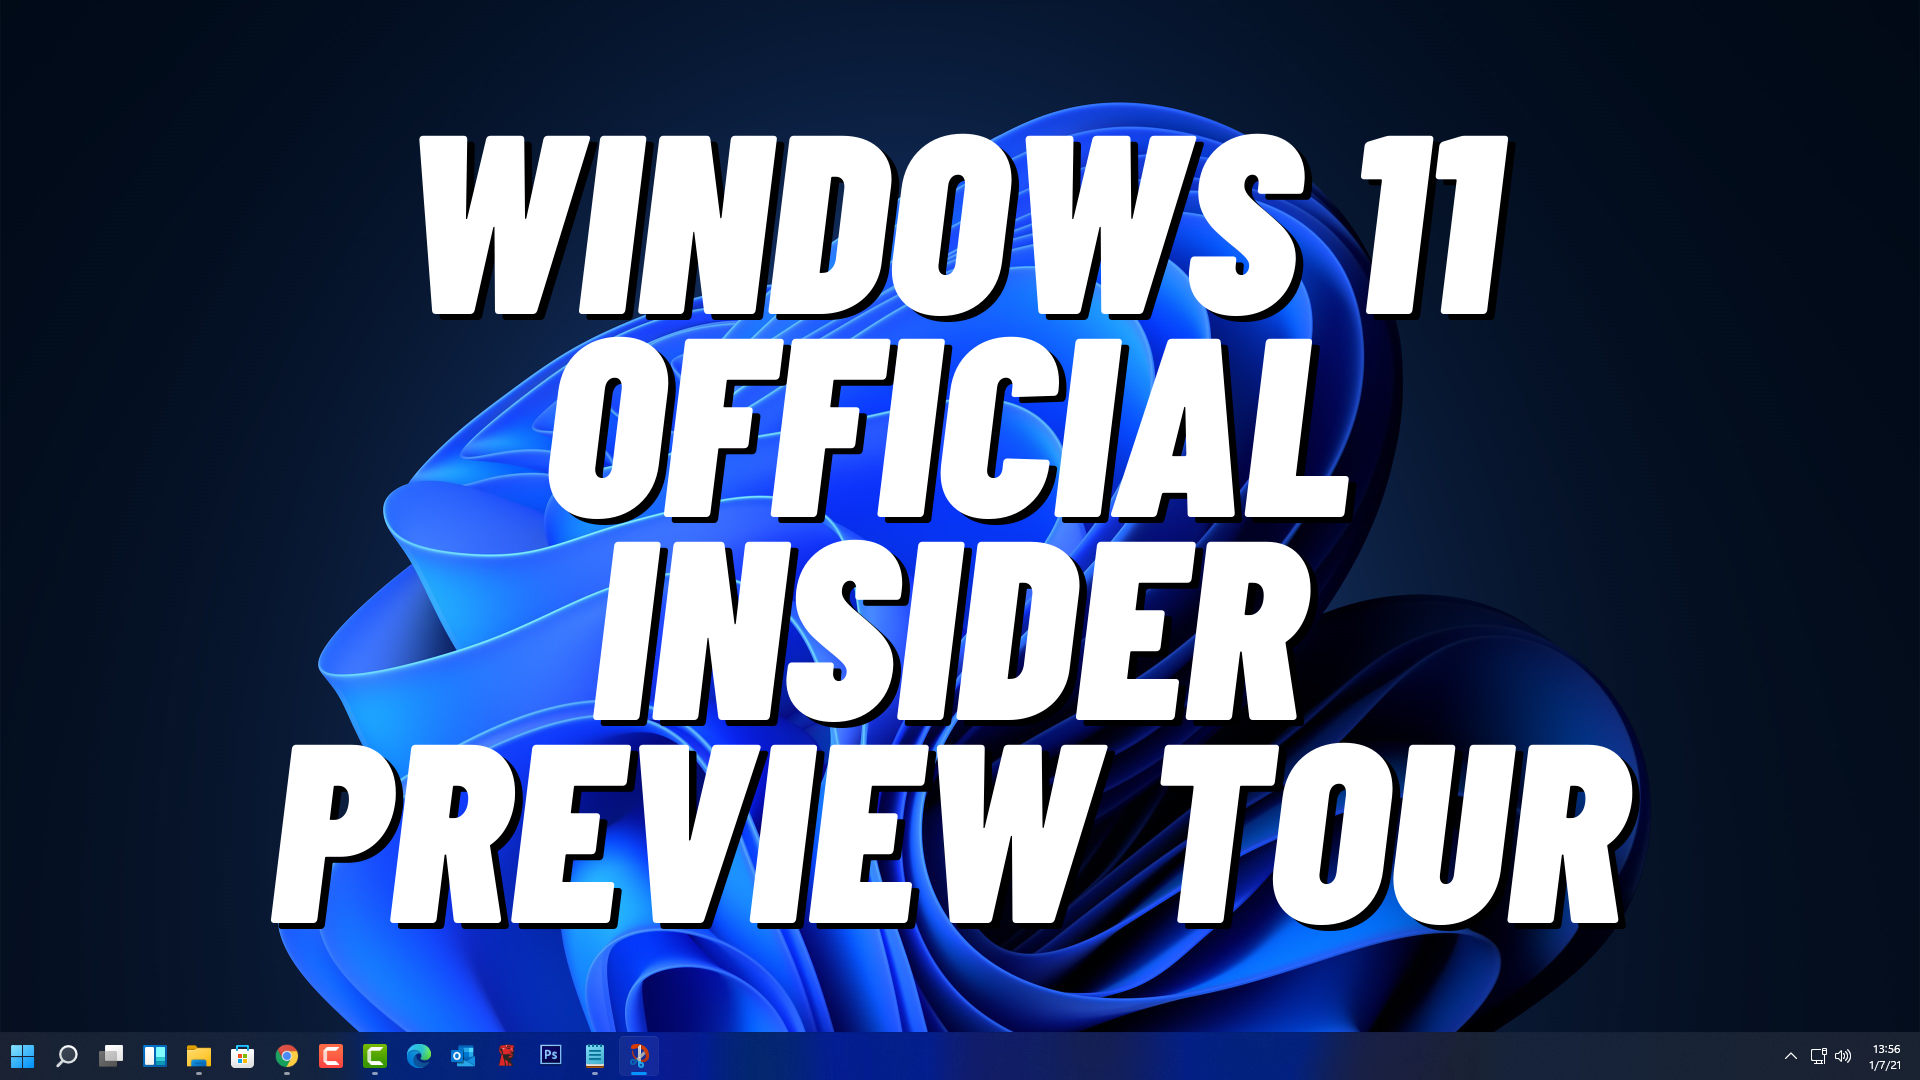 Windows 11 Official Insider Preview Tour